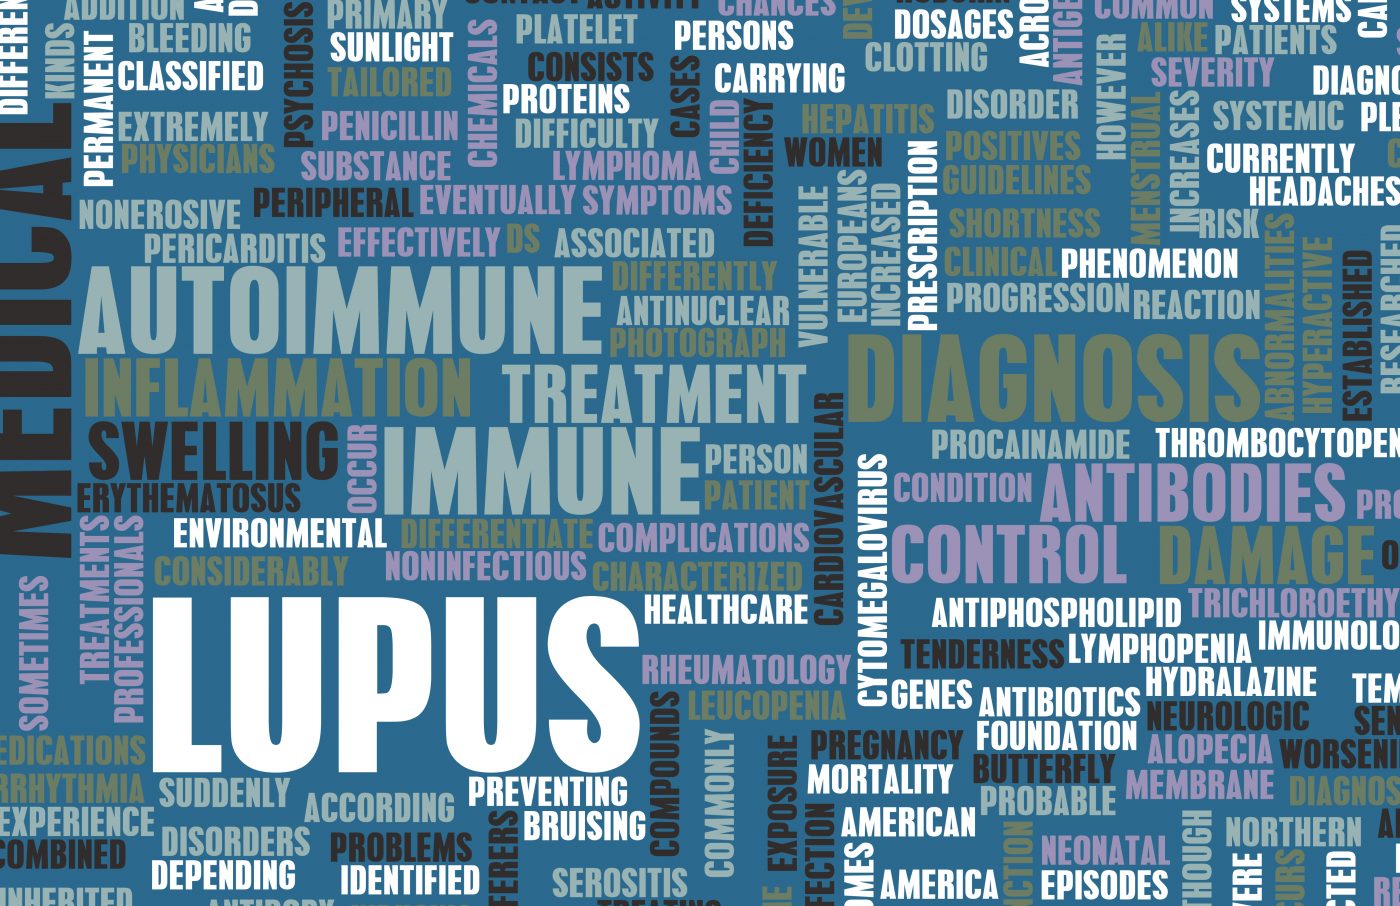 Systemic Lupus Erythematous Patients Prone to Higher Cardiovascular Disease Rates